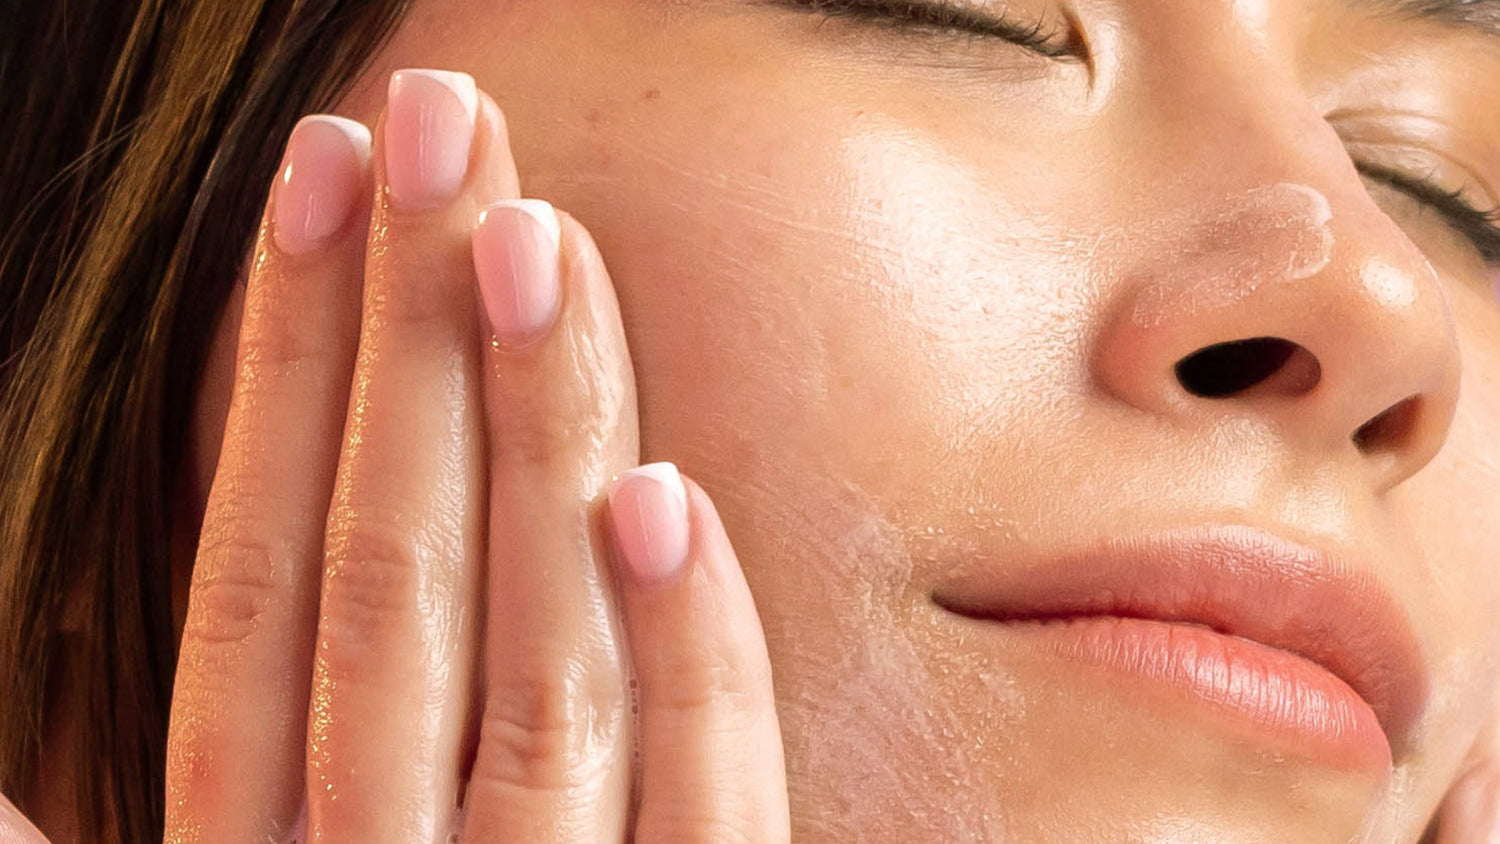 A woman is using a facial cleanser infused with Bulgarian rose extract on her face.